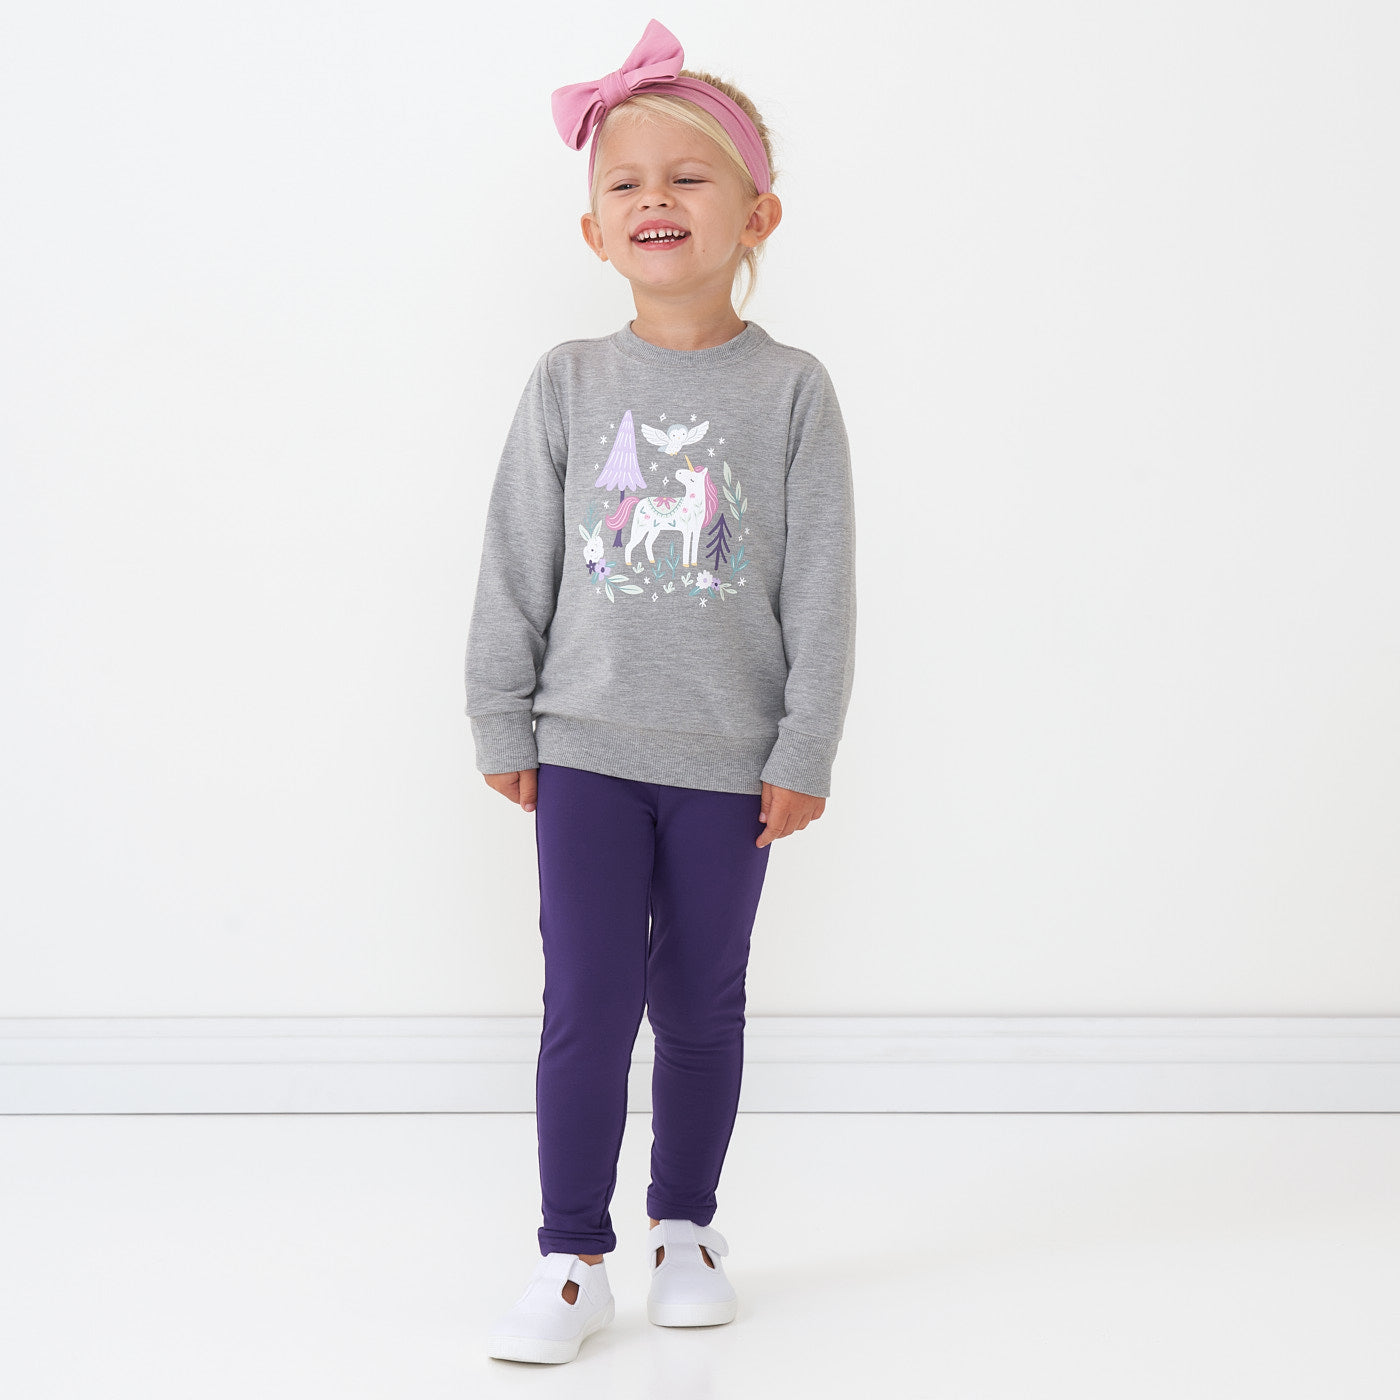 Child wearing Deep Amethyst cozy leggings and coordinating crewneck sweater and luxe bow headband